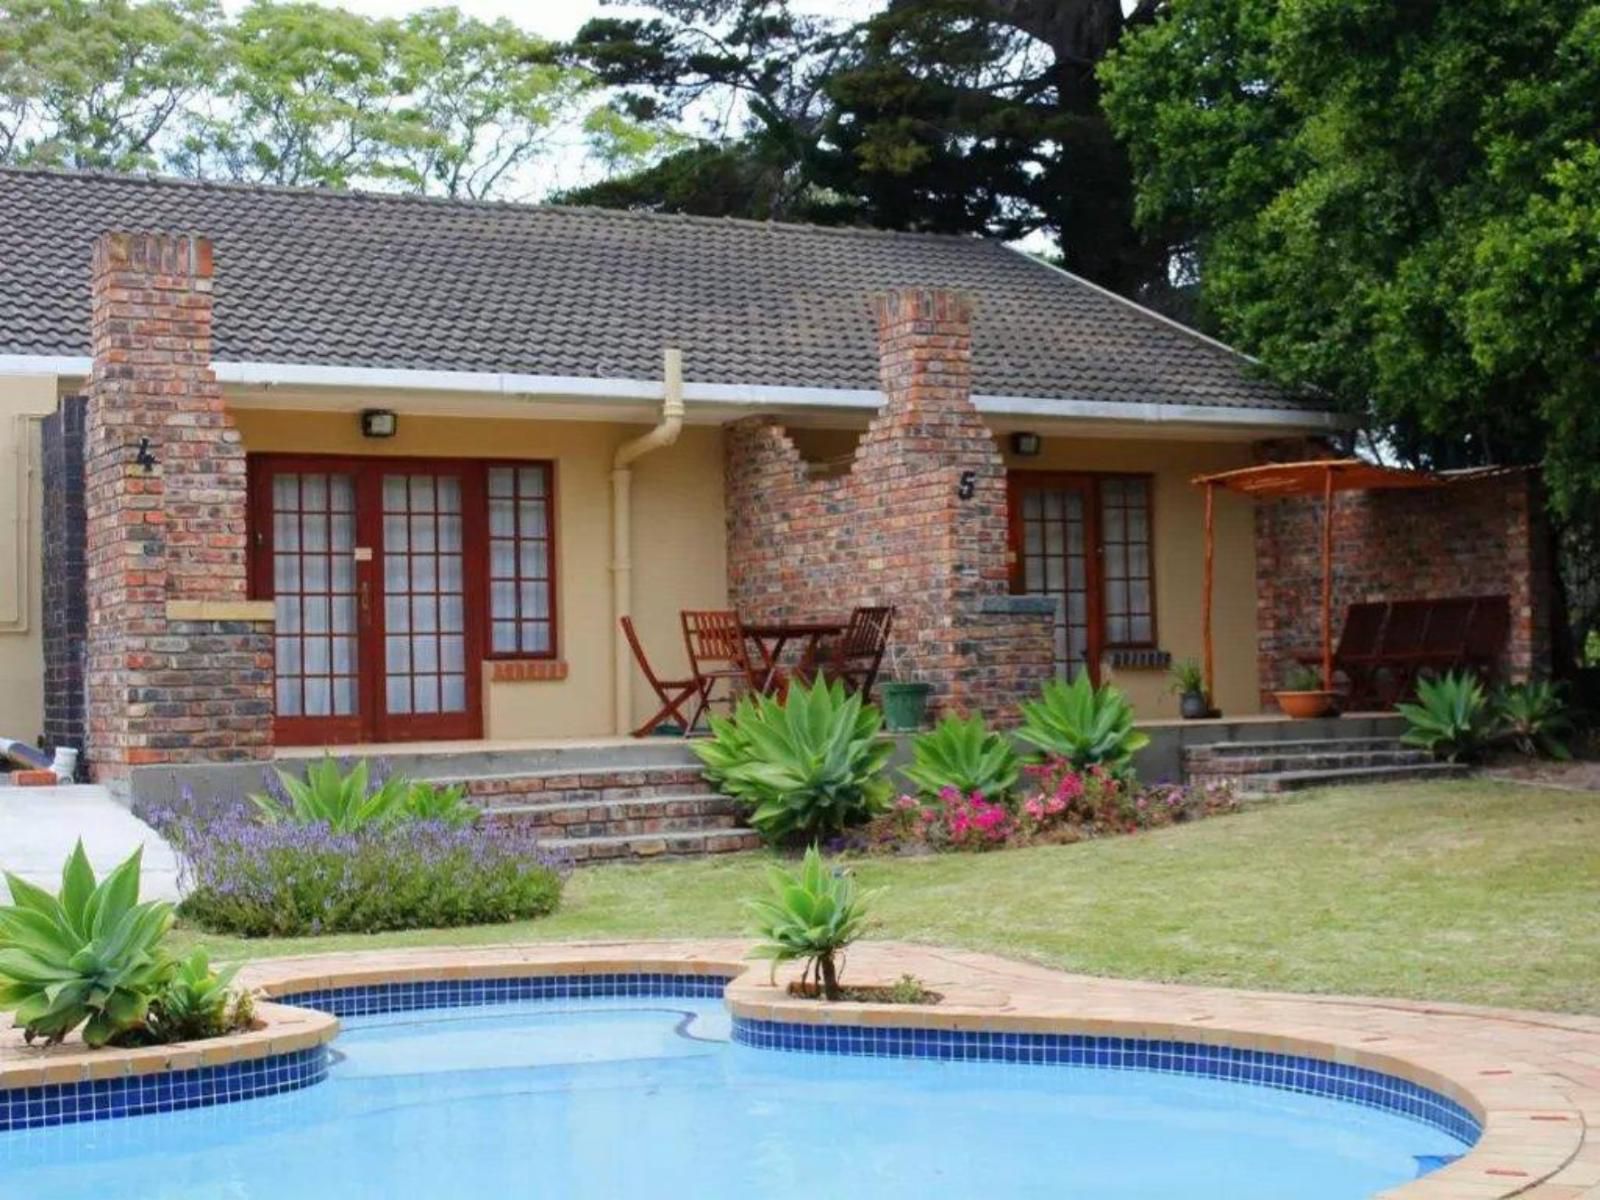 African Aquila Guest Lodge Walmer Port Elizabeth Eastern Cape South Africa House, Building, Architecture, Garden, Nature, Plant, Swimming Pool